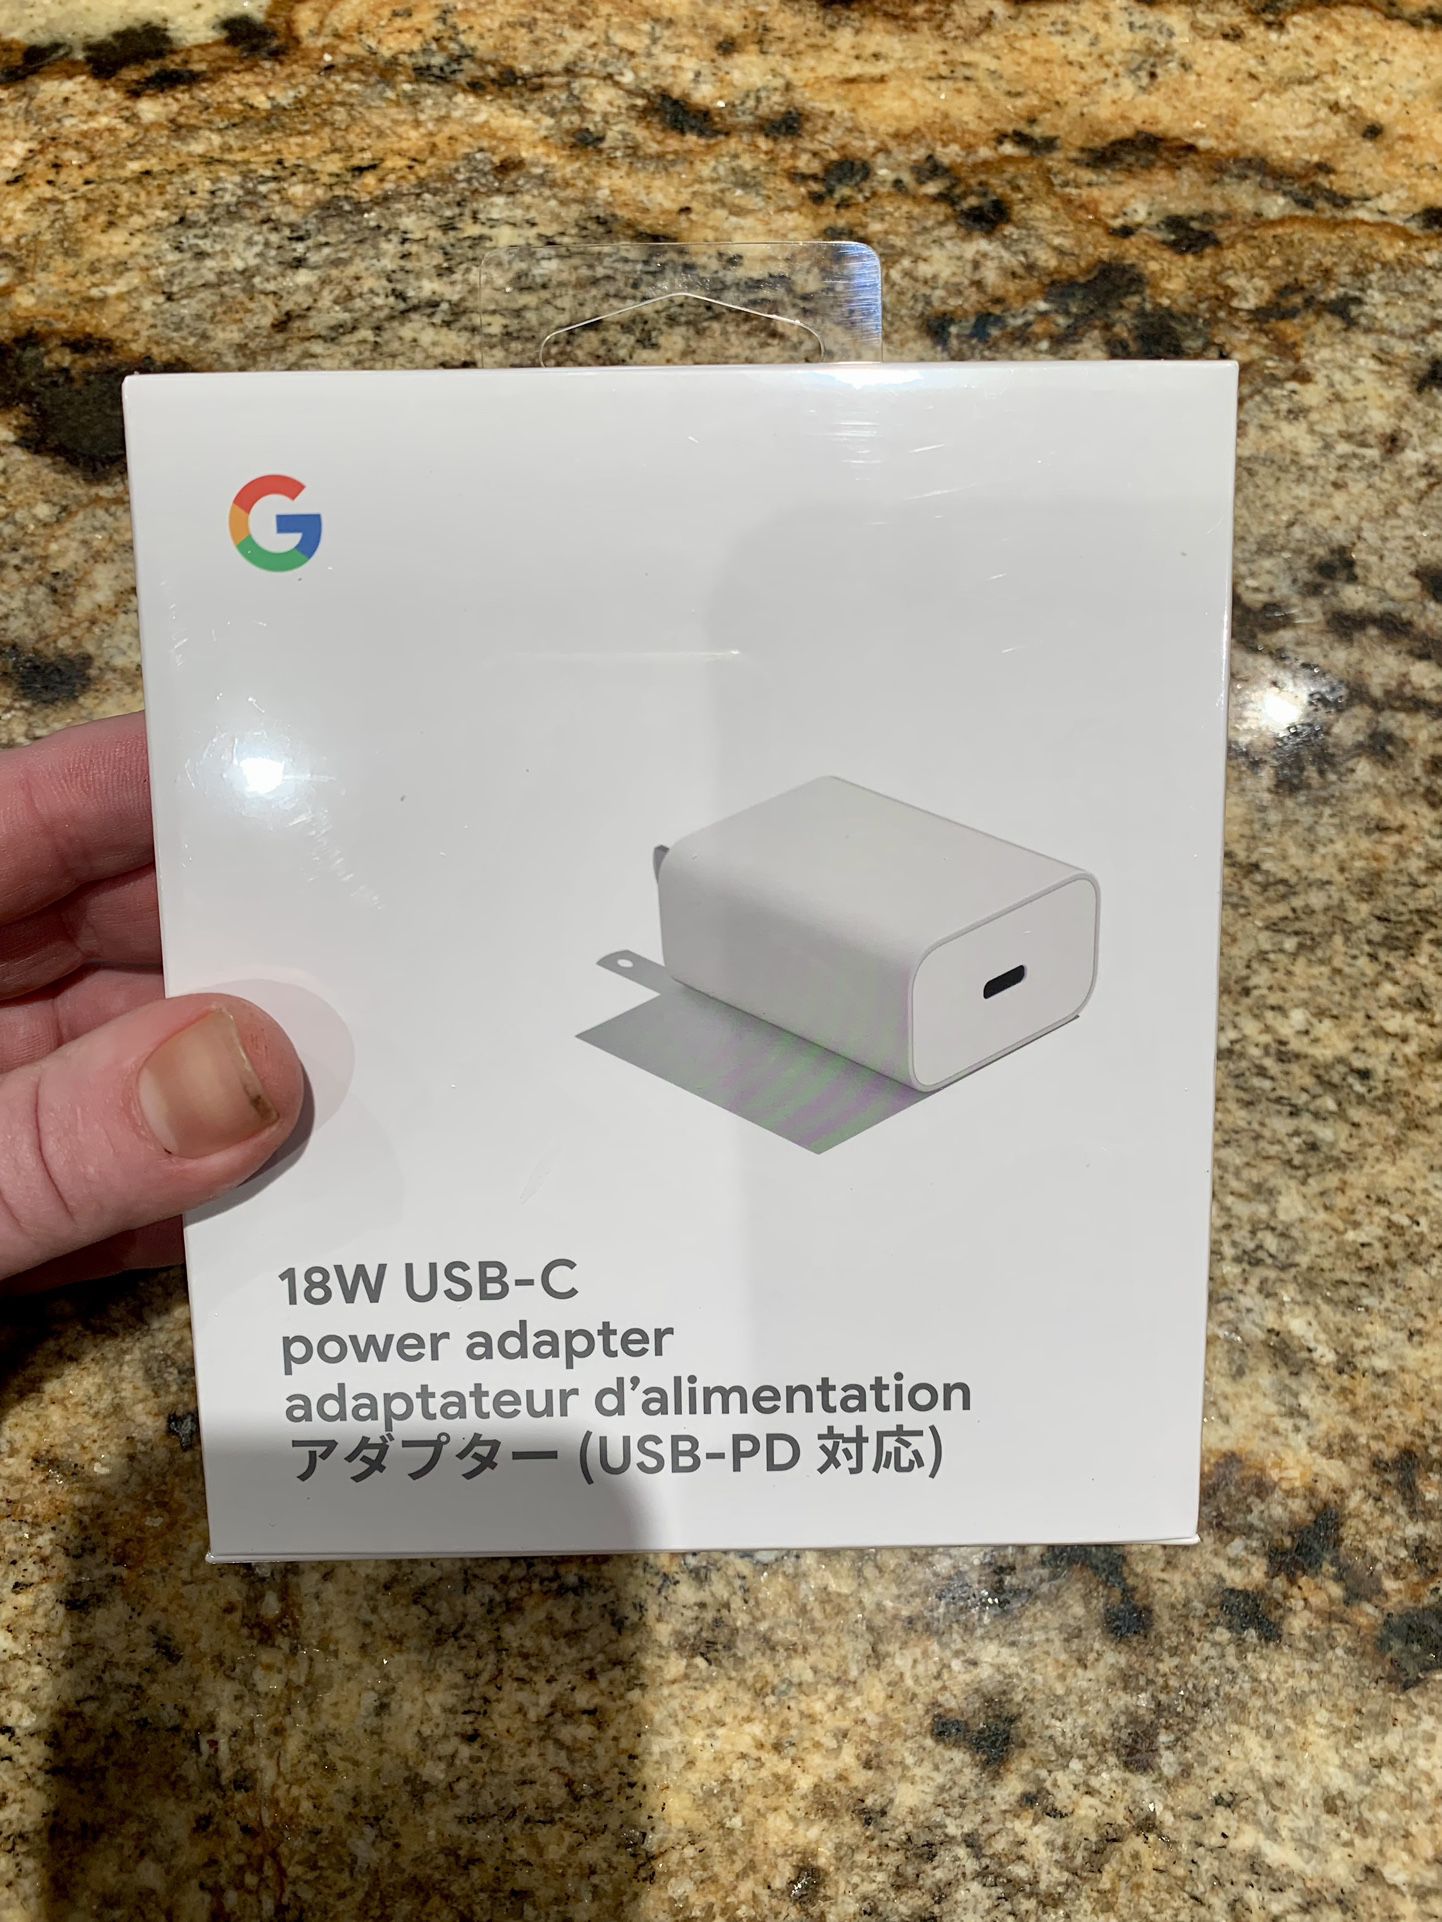 New Google 18W USB-C Adapter and Cord